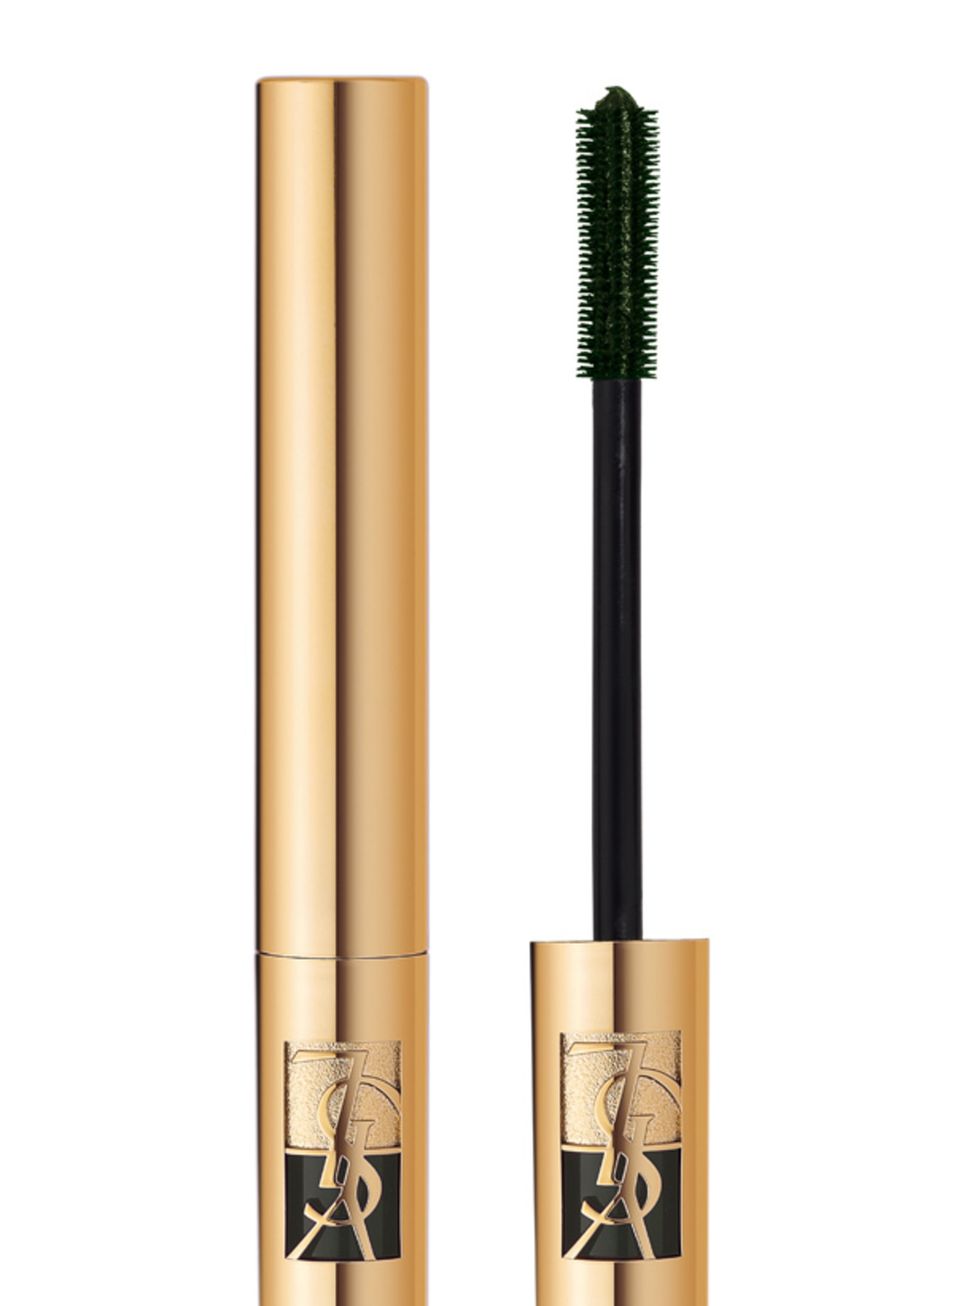 <p>Everlong Mascara, £19.57 by <a href="http://www.boots.com/webapp/wcs/stores/servlet/ProductDisplay?storeId=10052&amp;productId=36186&amp;callingViewName=&amp;langId=-1&amp;catalogId=10551">YSL</a></p><p>For great quality, chic packaging and a long last